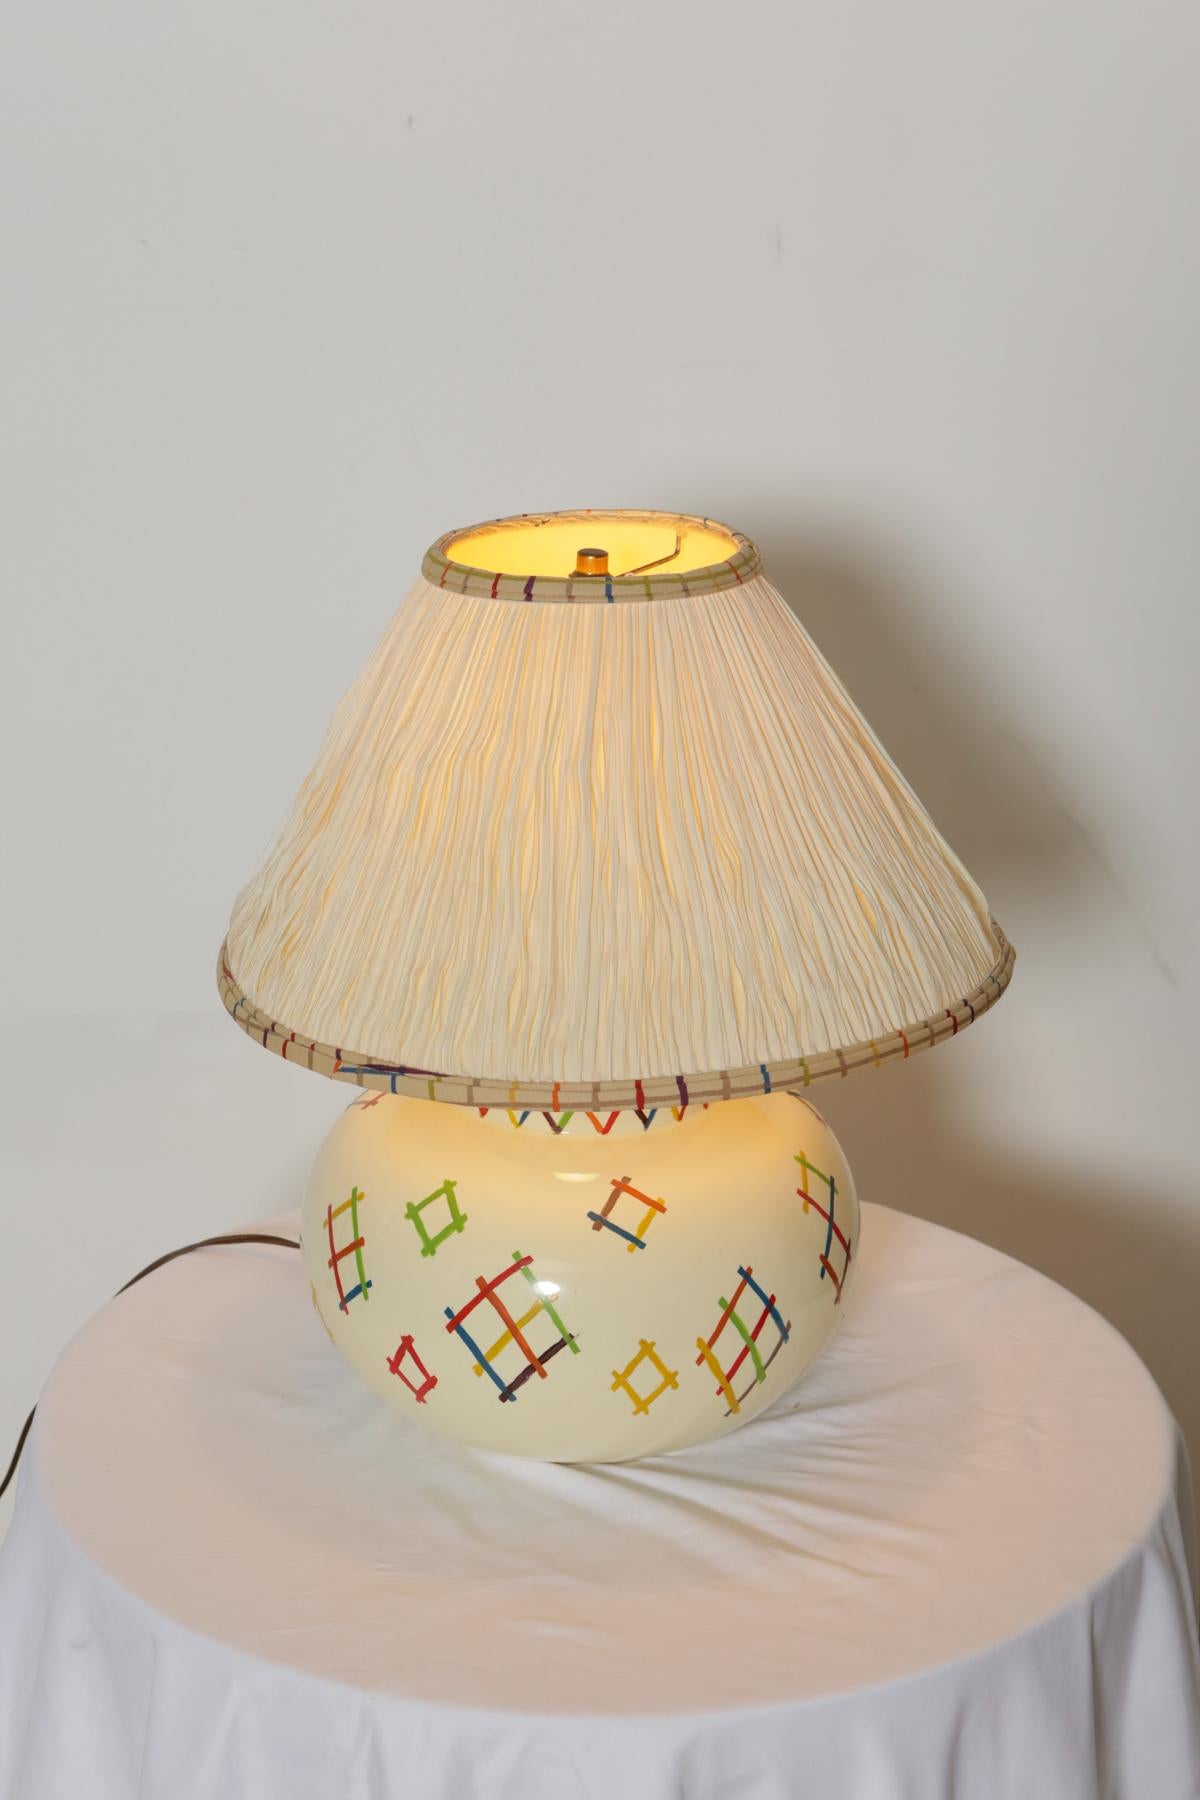 Stitch pattern hand painted table lam.

A classy off-white ceramic base table lamp with beautiful colorful patches design and white shade. The hand painted design features red, blue, yellow and green stitch like patterns. Fashionable and timeless,